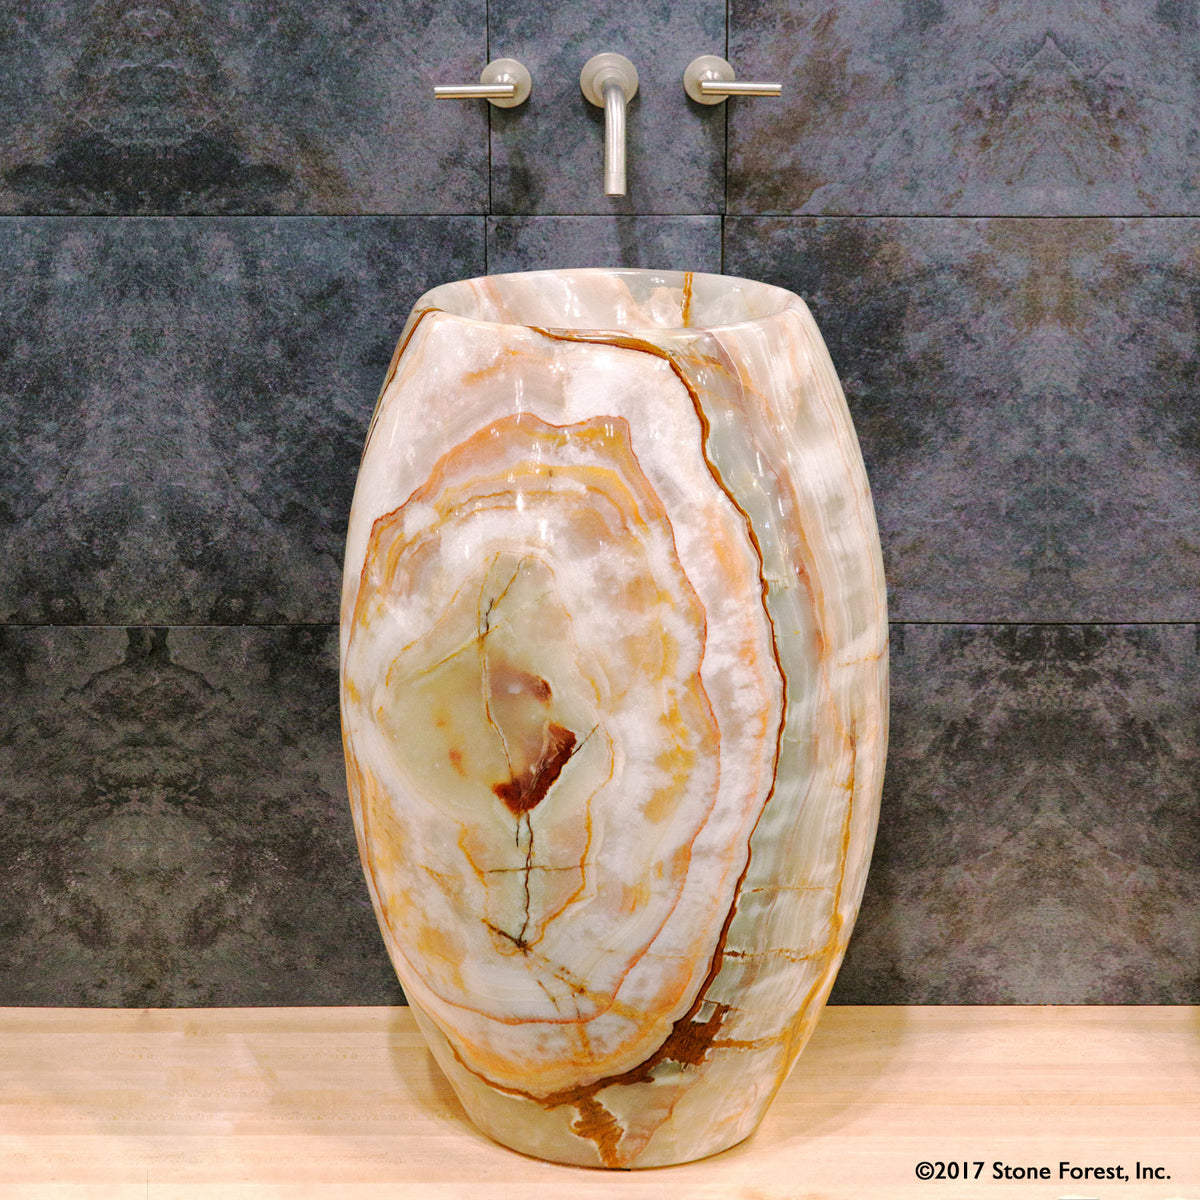 Stone Forest Barrel Pedestal Sink carved from a single block of multi-color onyx image 3 of 3